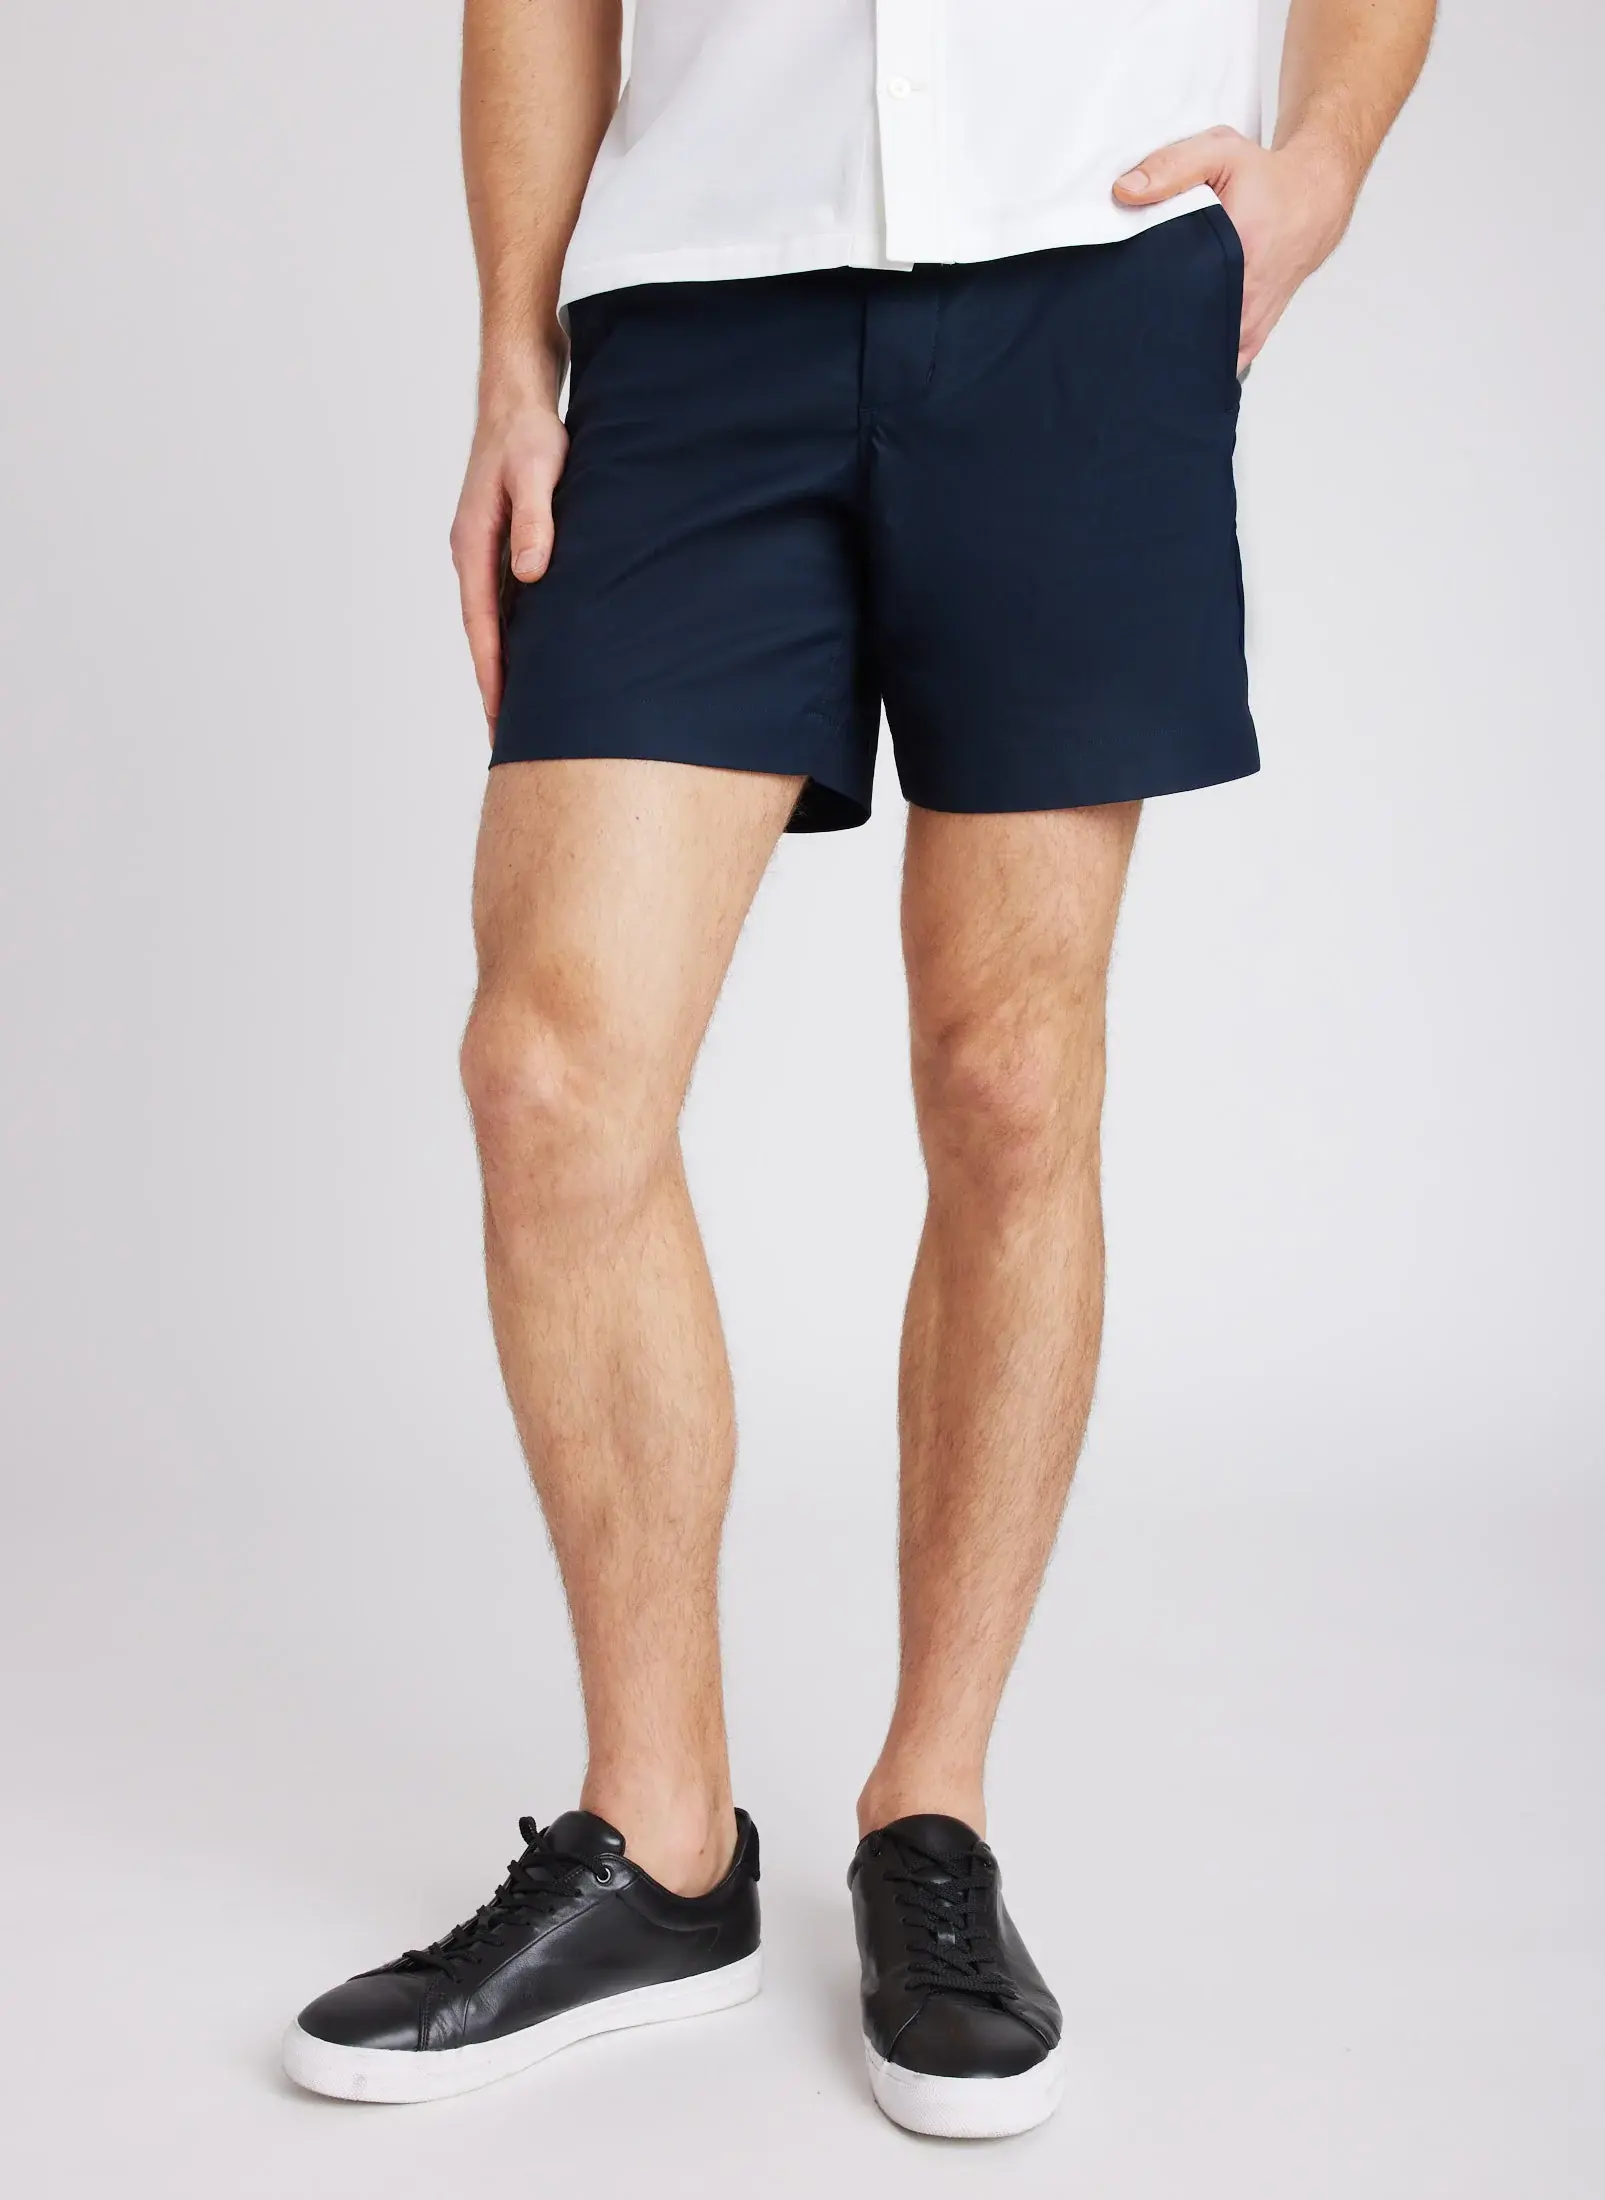 Kit And Ace Navigator Essential Shorts 6". 1